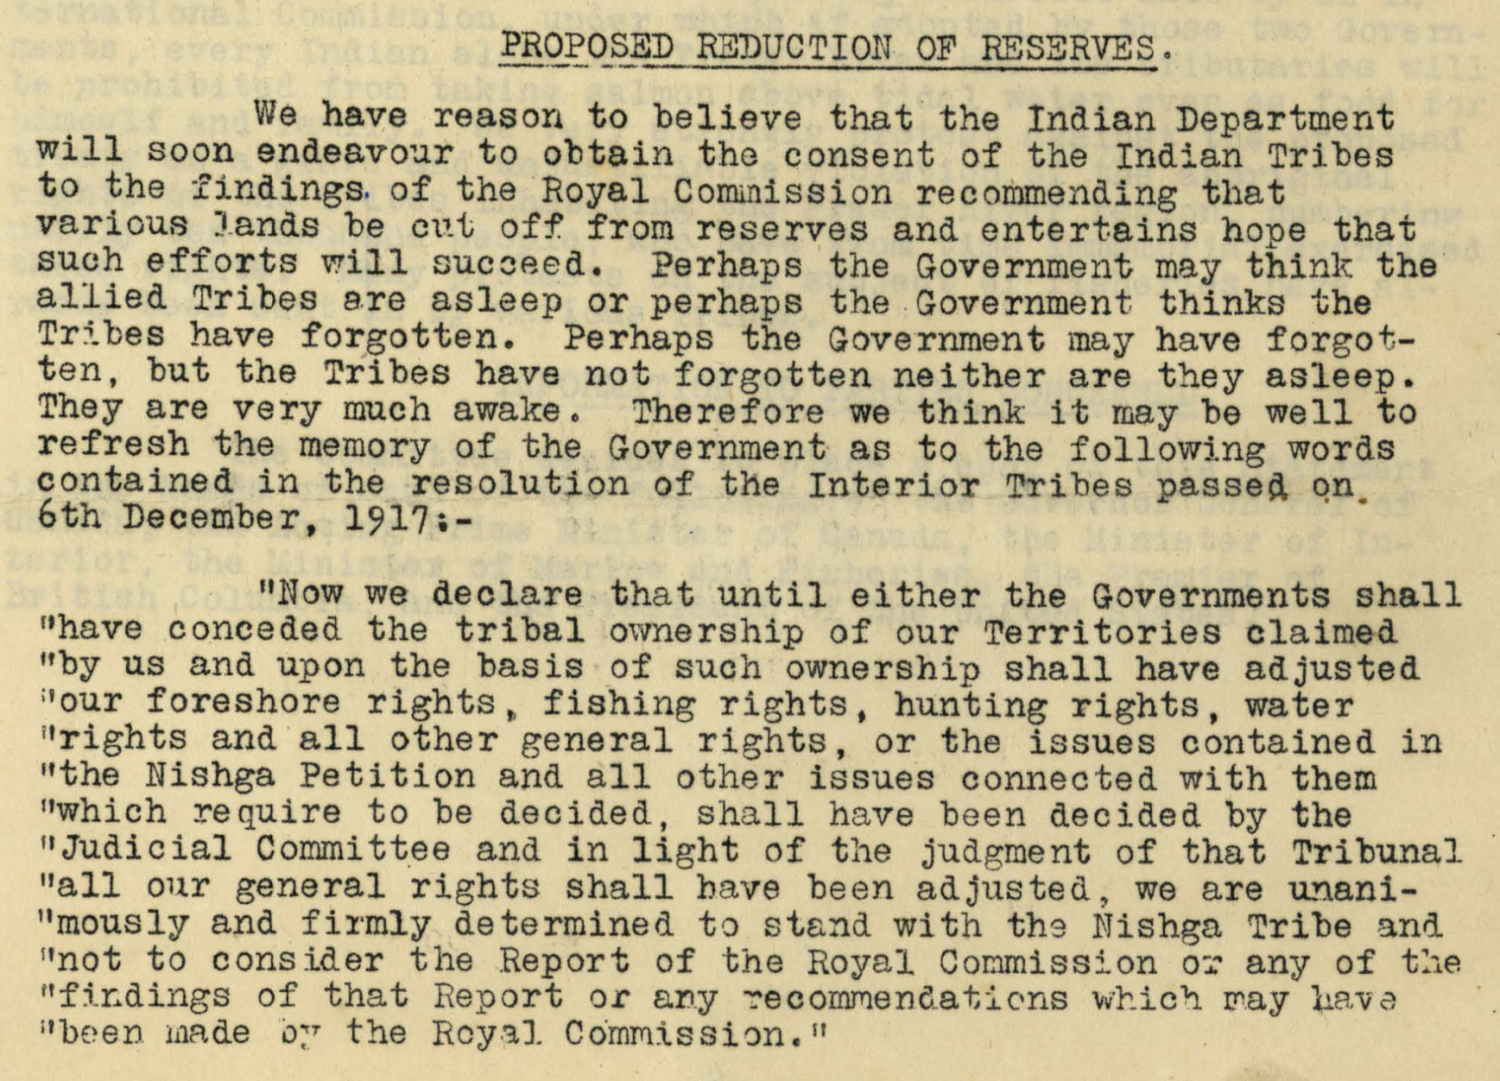 Excerpt from “STATEMENT OF THE COMMITTEE OF THE ALLIED TRIBES OF BRITISH COLUMBIA FOR THE GOVERNMENT OF CANADA.”